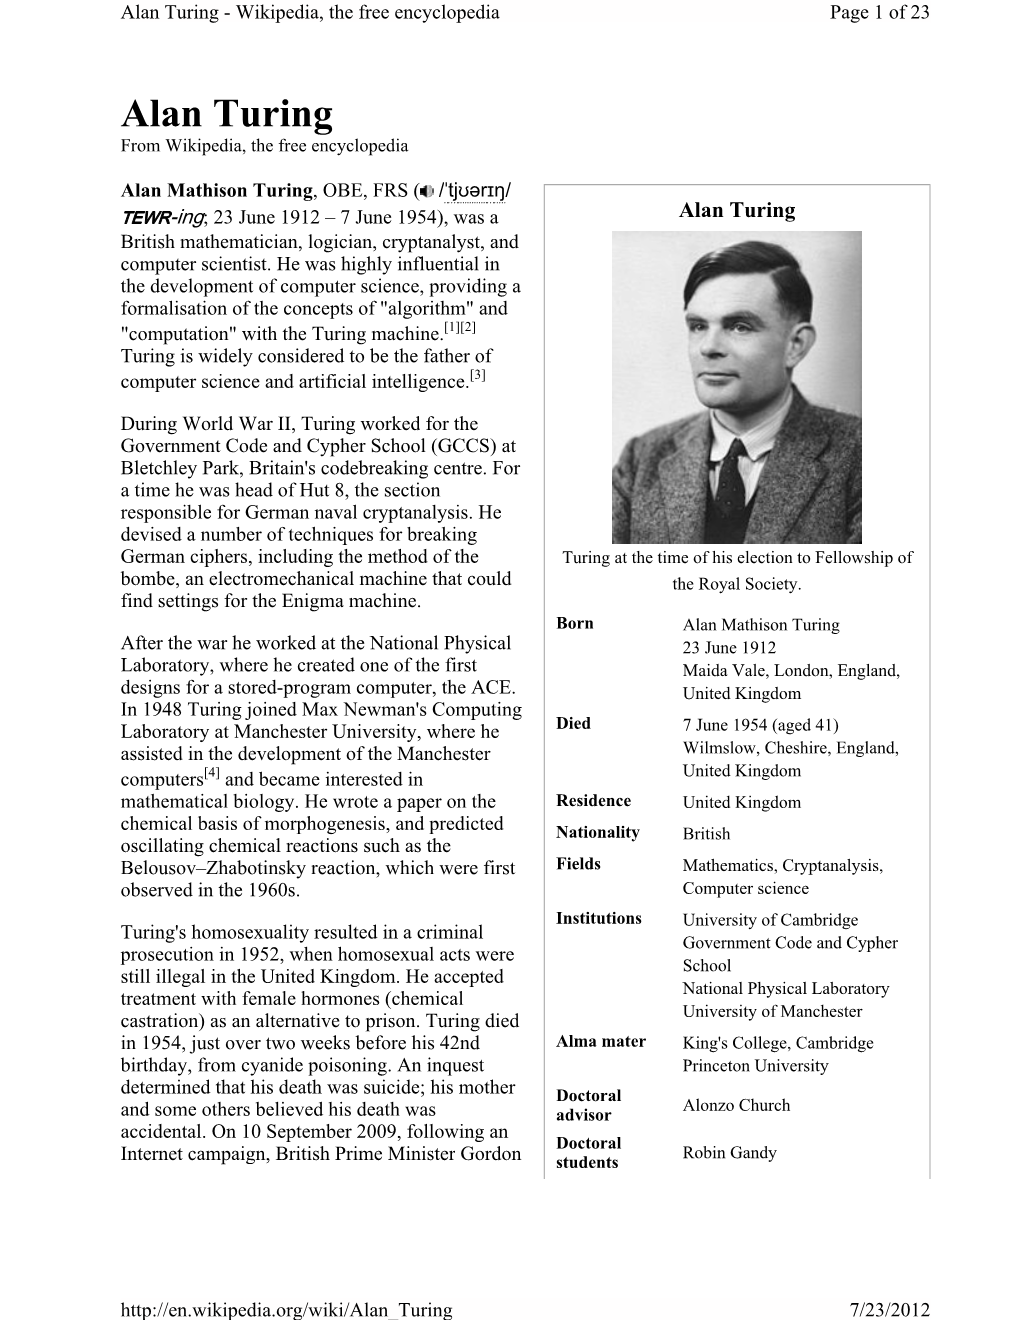 Alan Turing - Wikipedia, the Free Encyclopedia Page 1 of 23